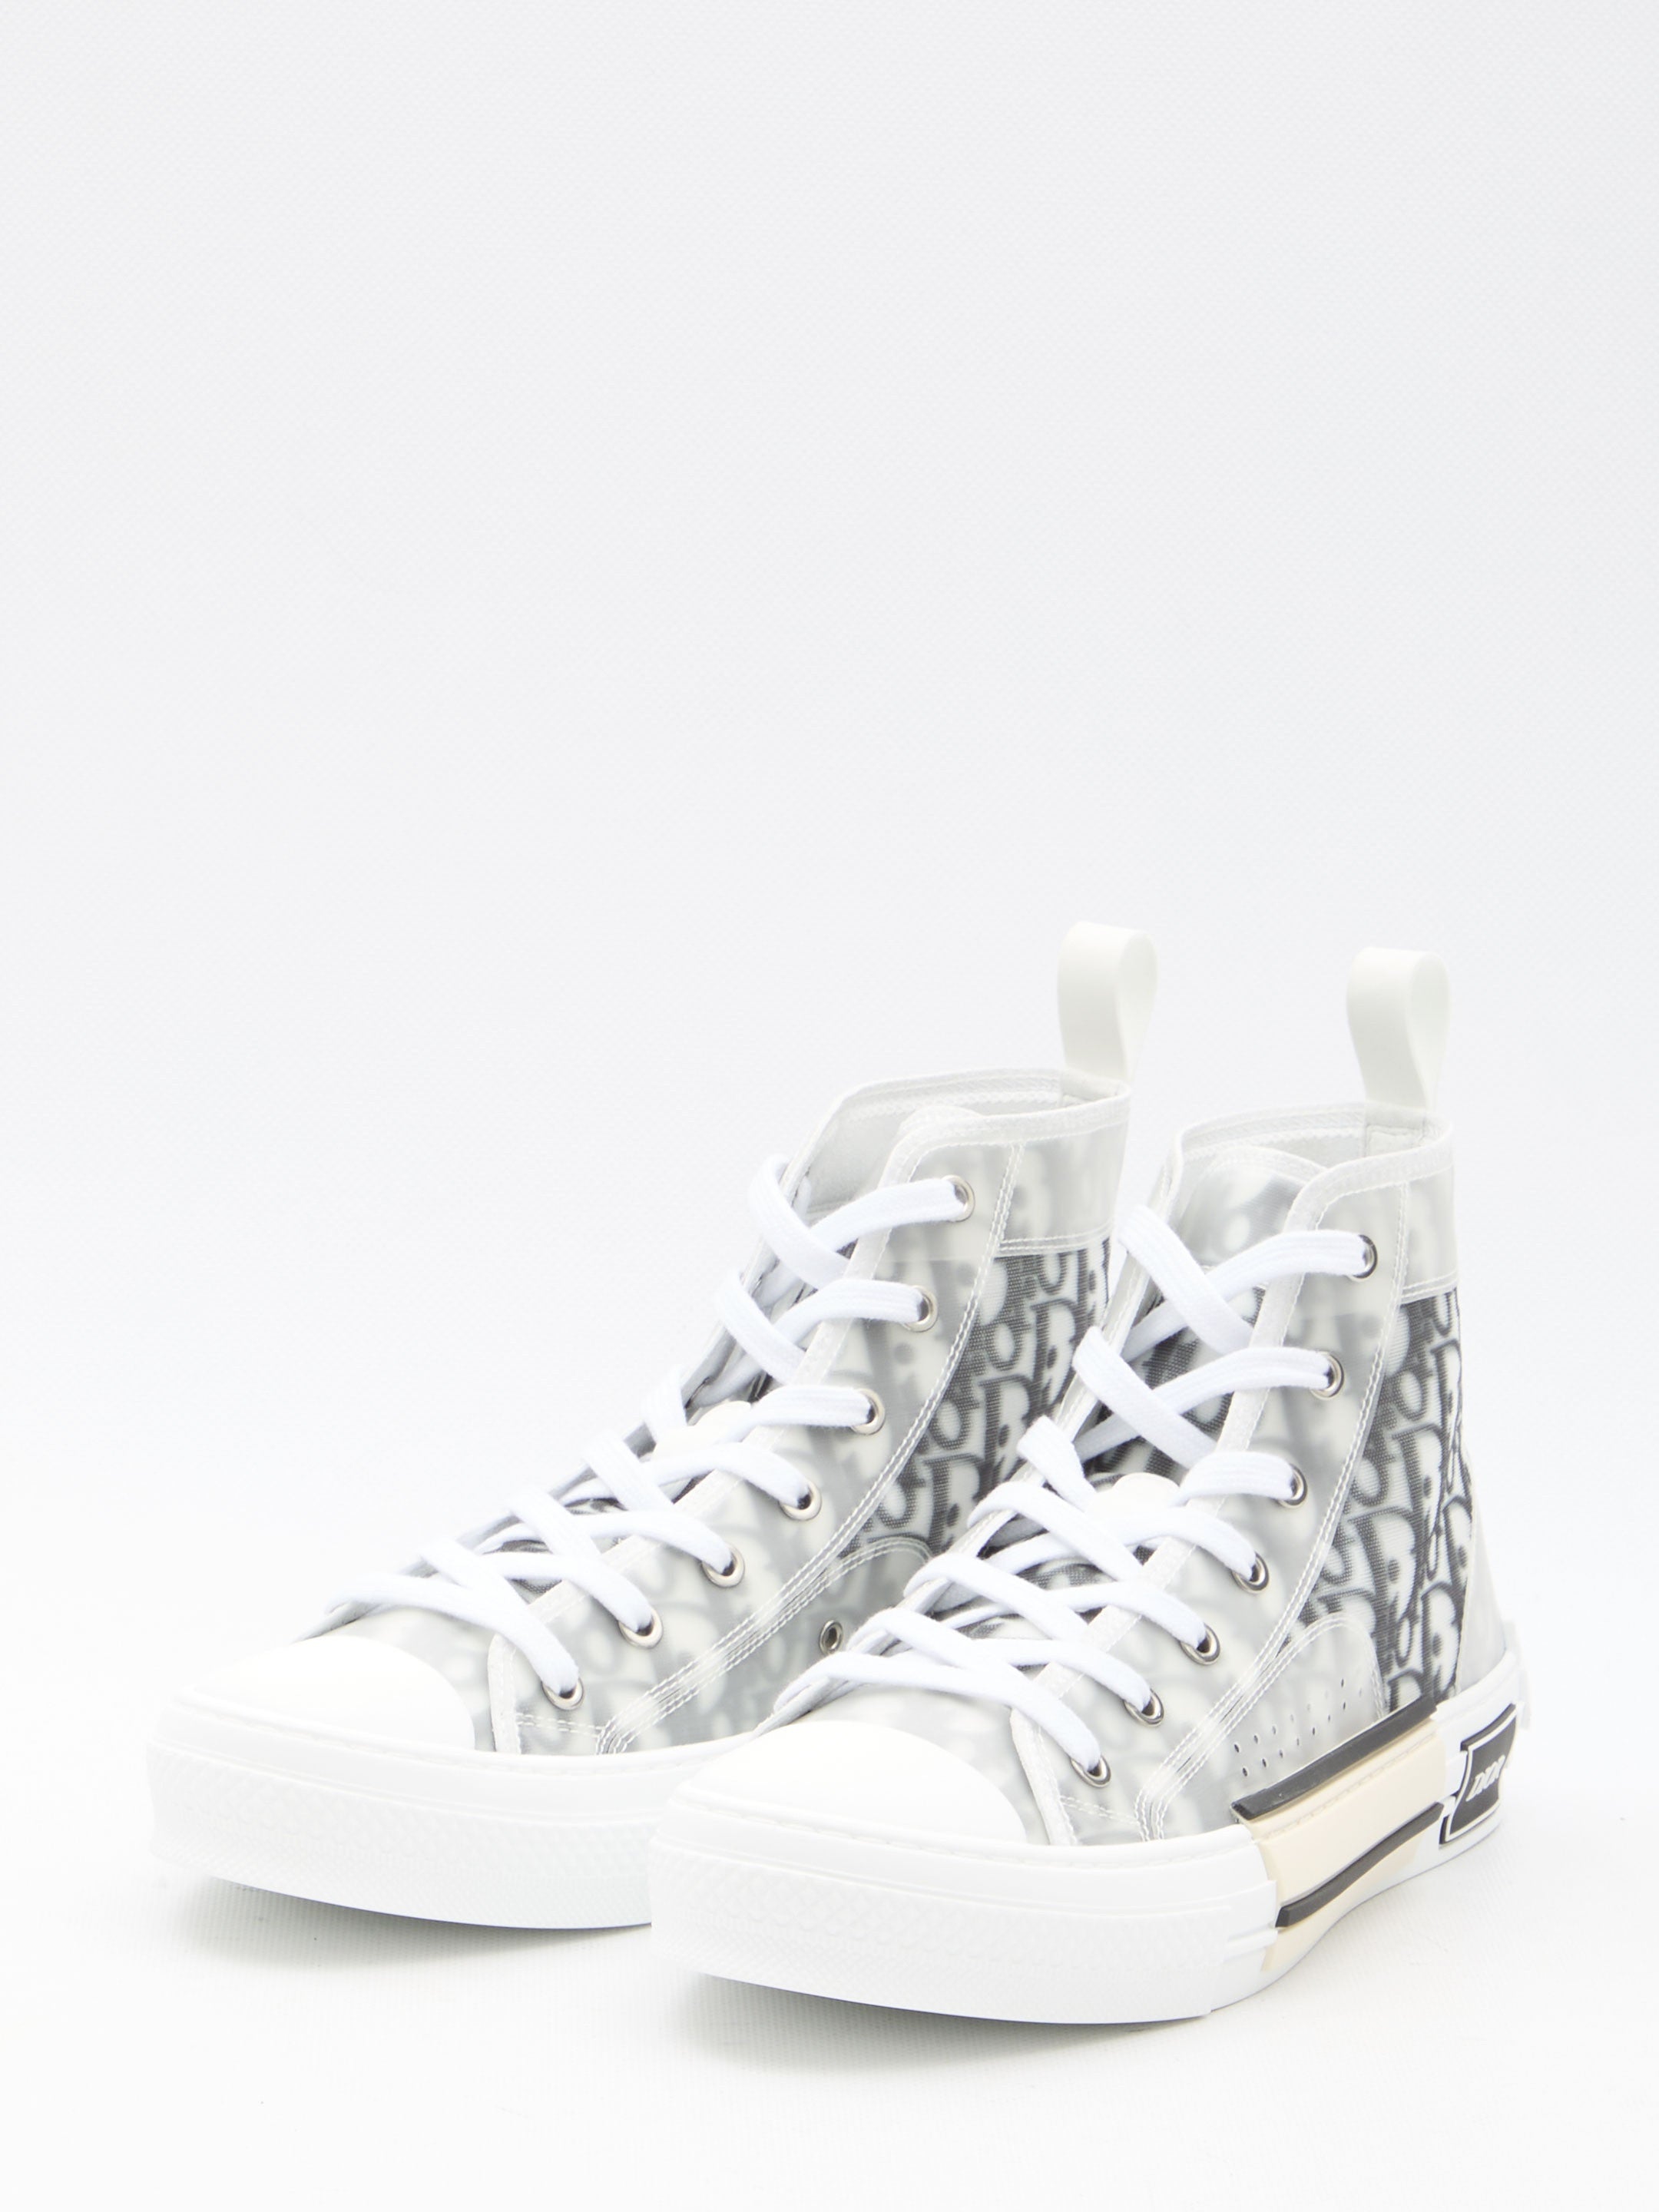 DIOR-HOMME-OUTLET-SALE-B23-high-top-sneakers-Sneakers-ARCHIVE-COLLECTION-2.jpg